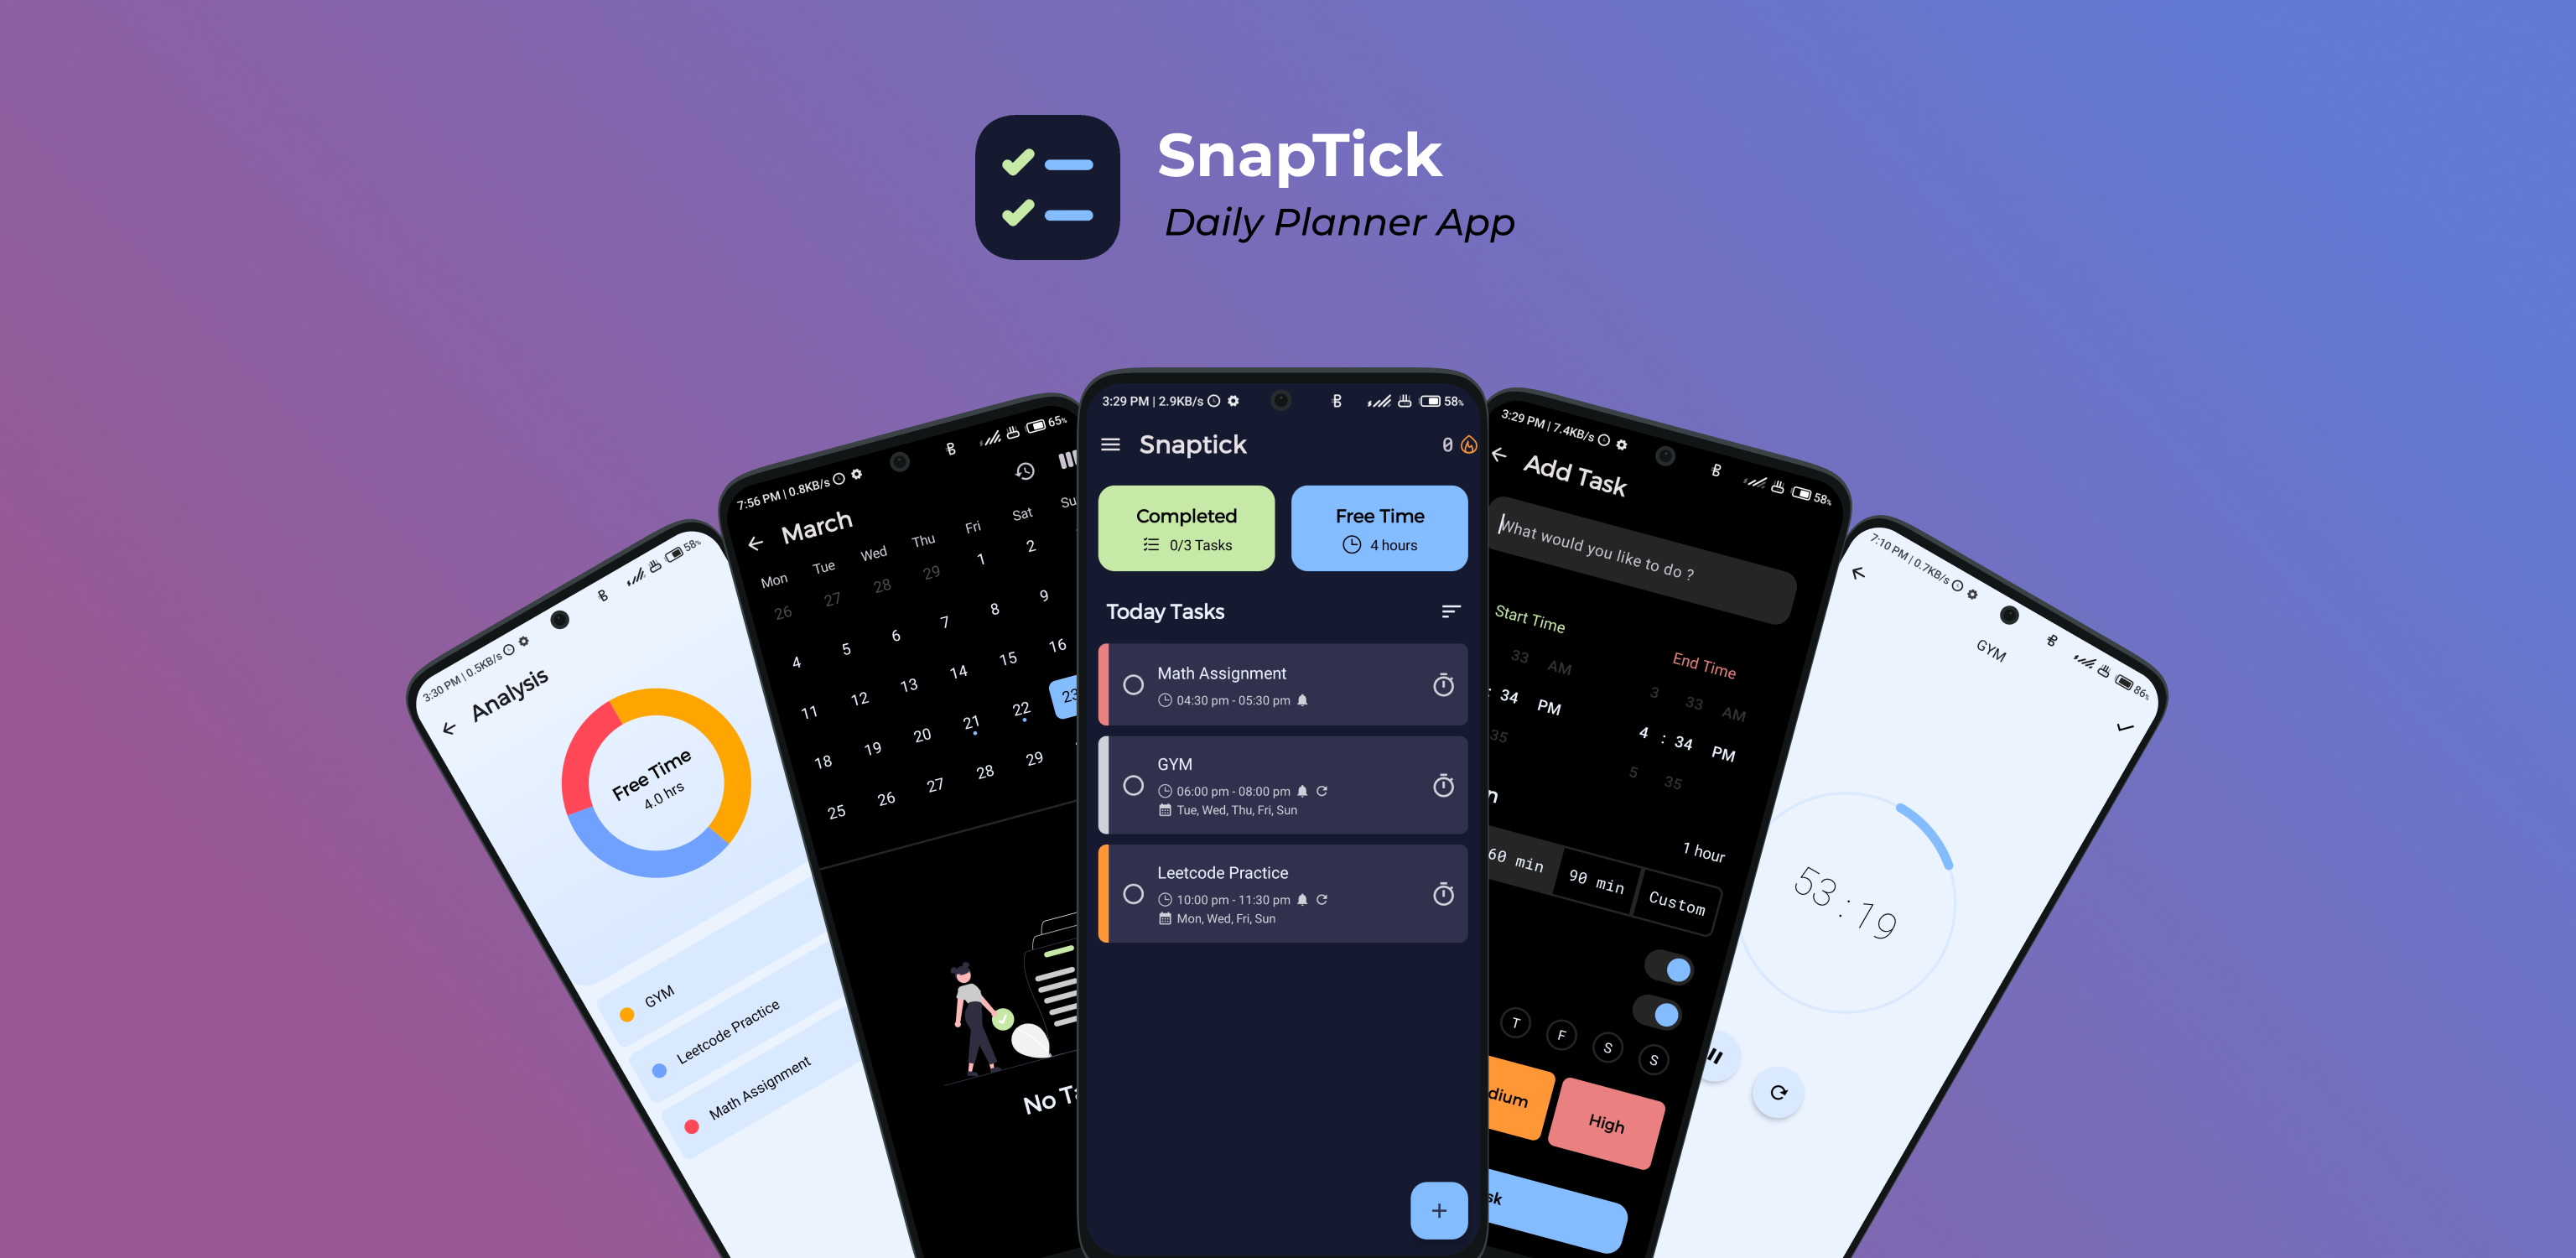 Different screens of the SnapTick app.